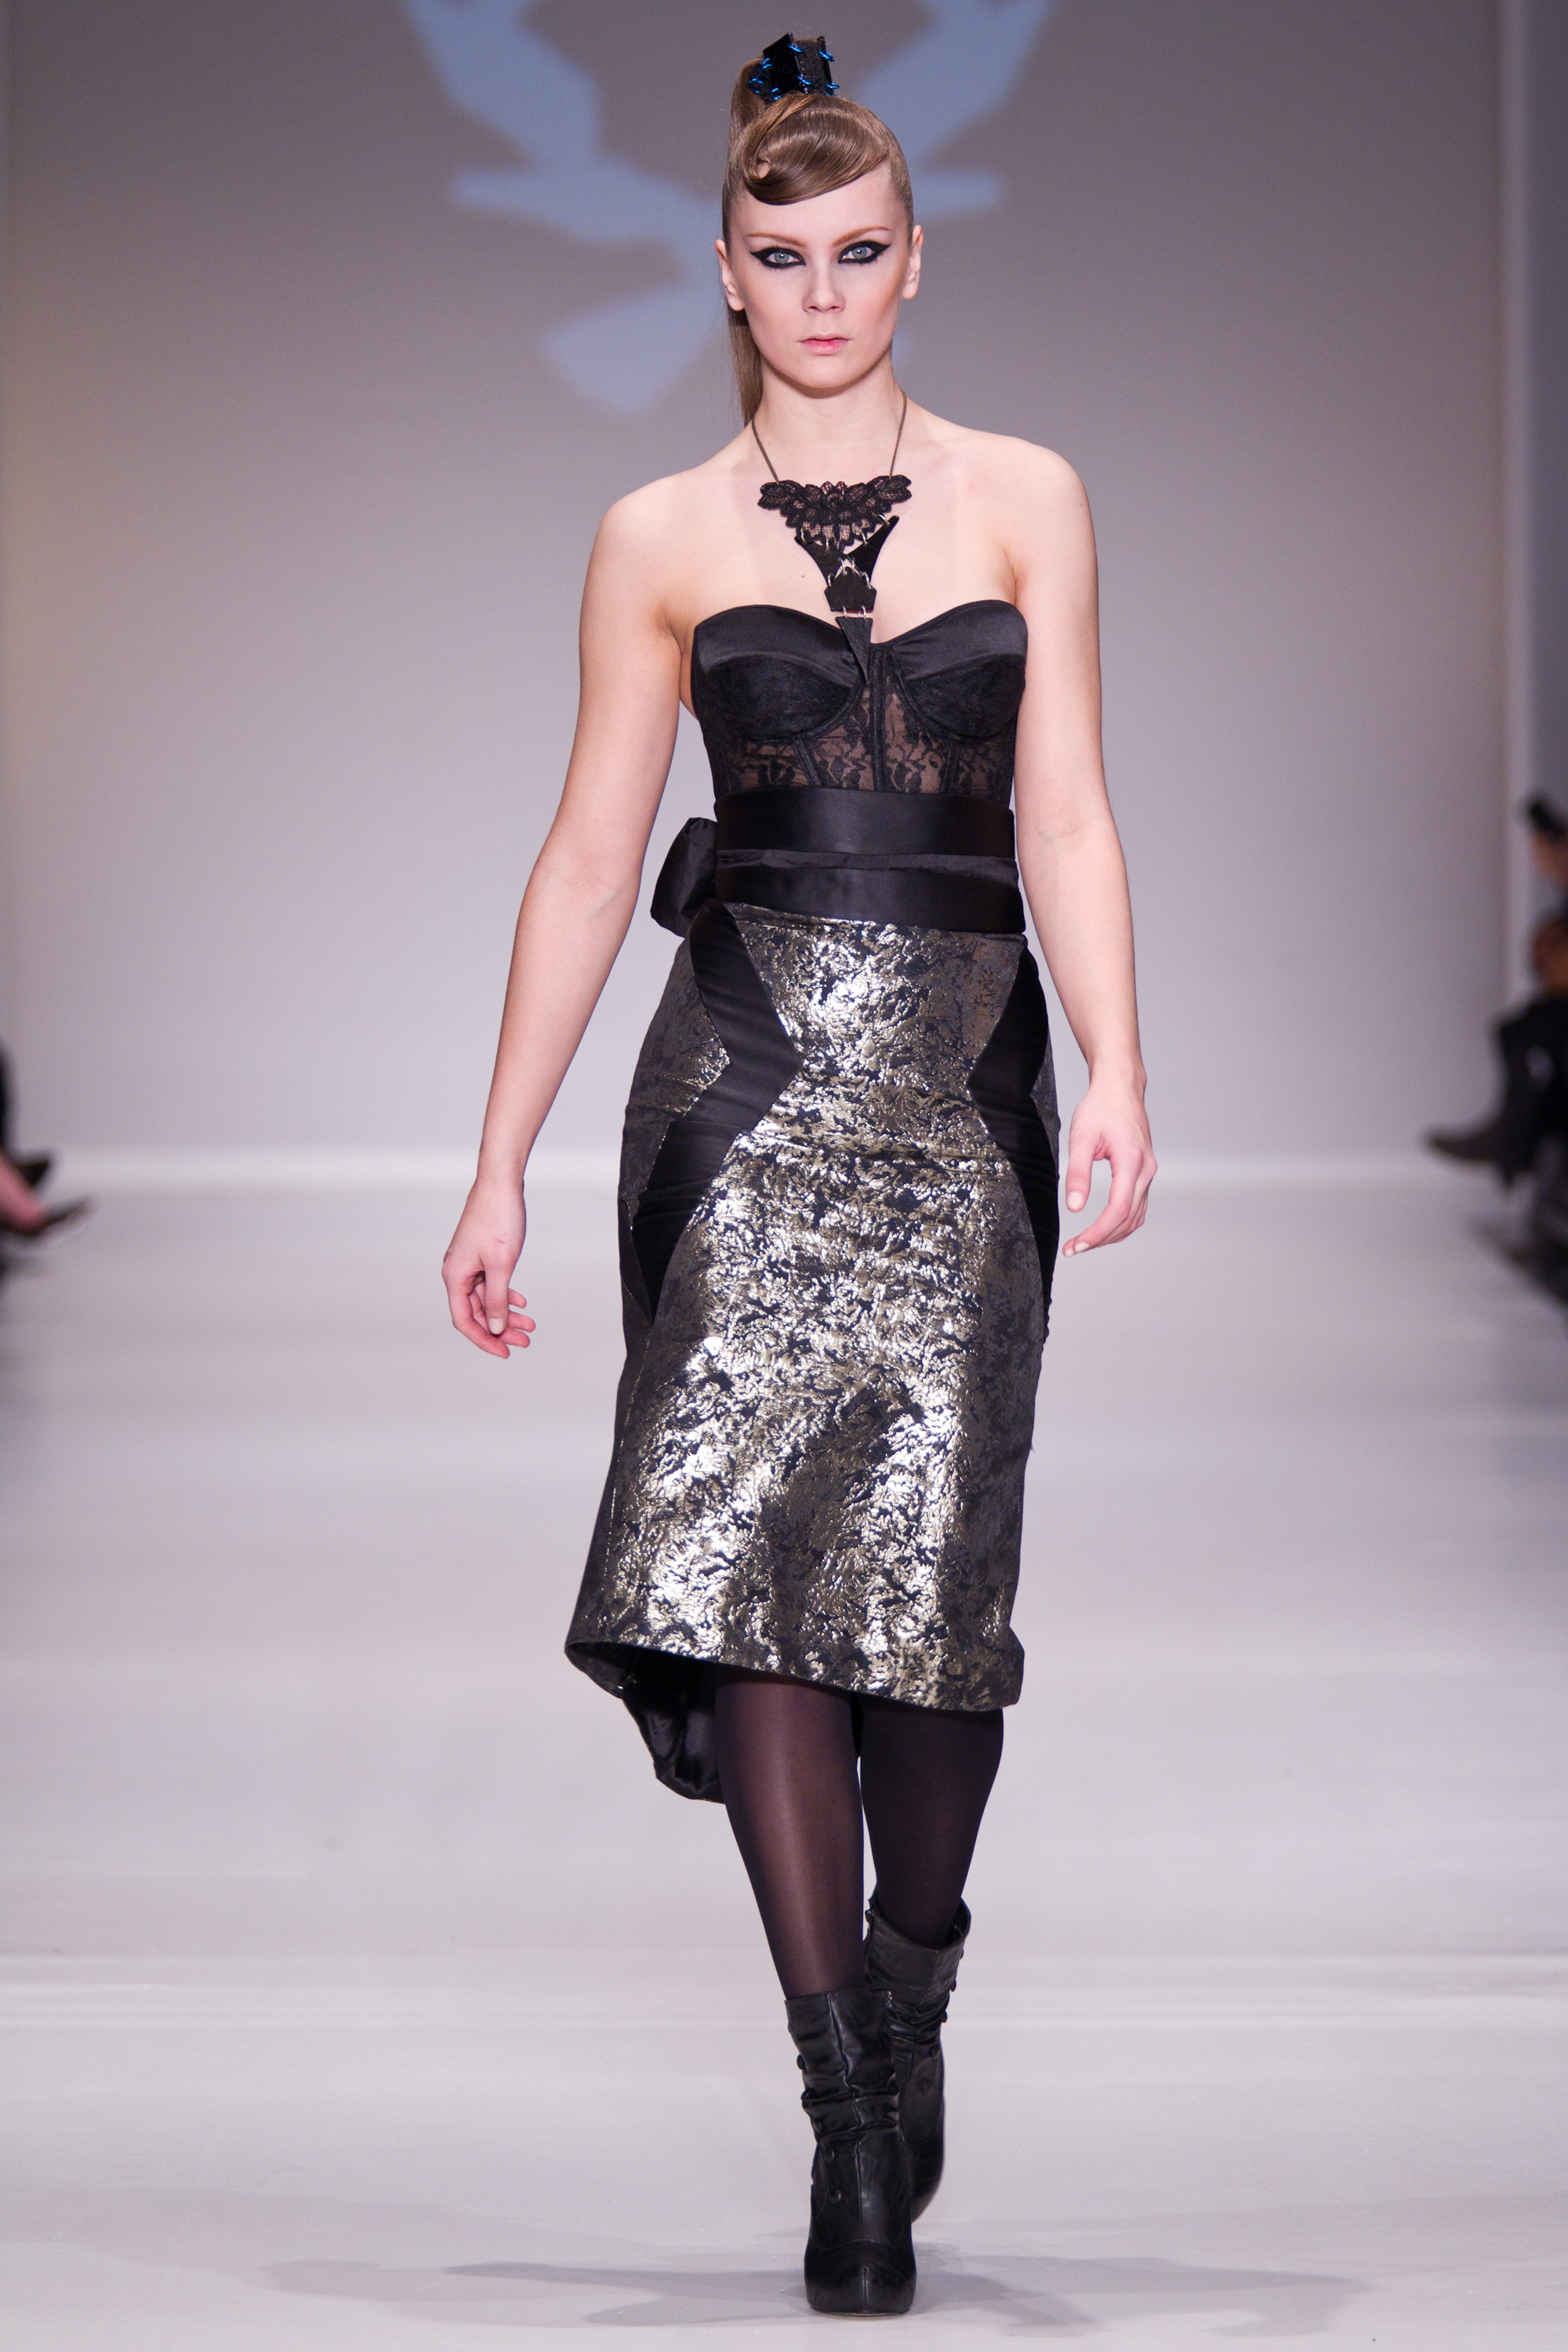 Montreal Fashion Week Day 2 : Anomal Fall/Winter 2011 Collection